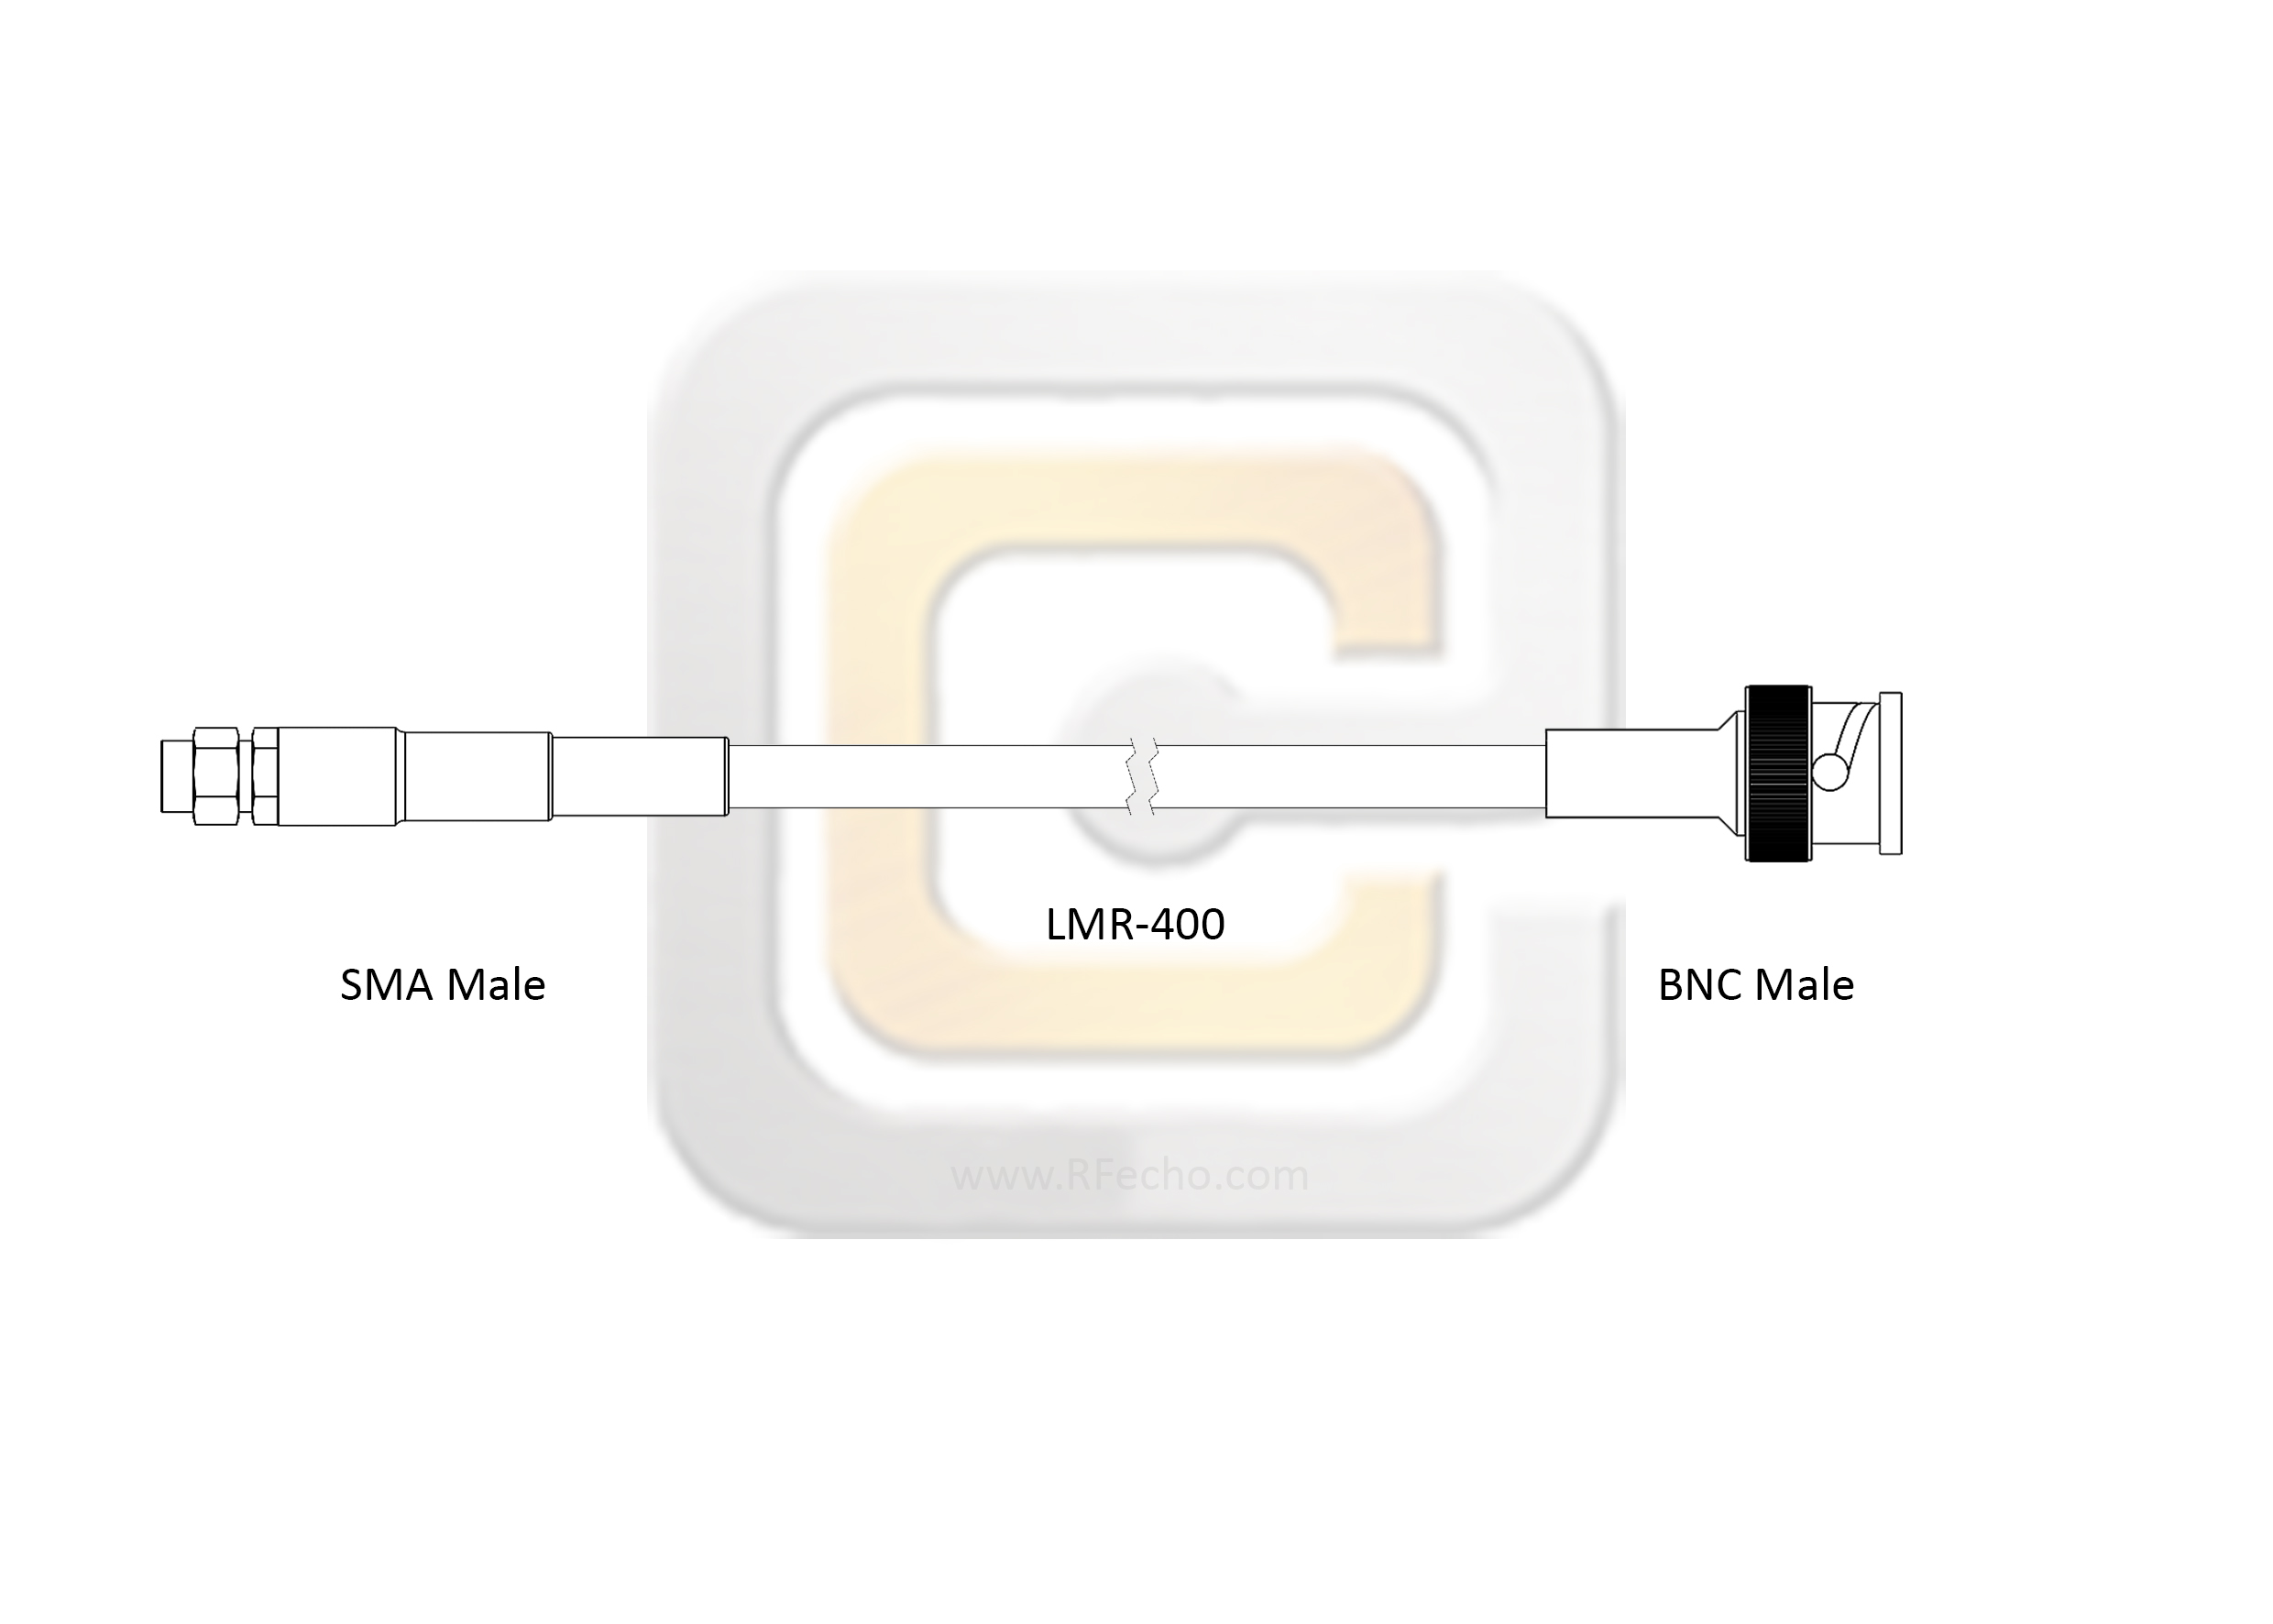 SMA Male to BNC Male, 4 GHz, LMR-400 Coax and RoHS